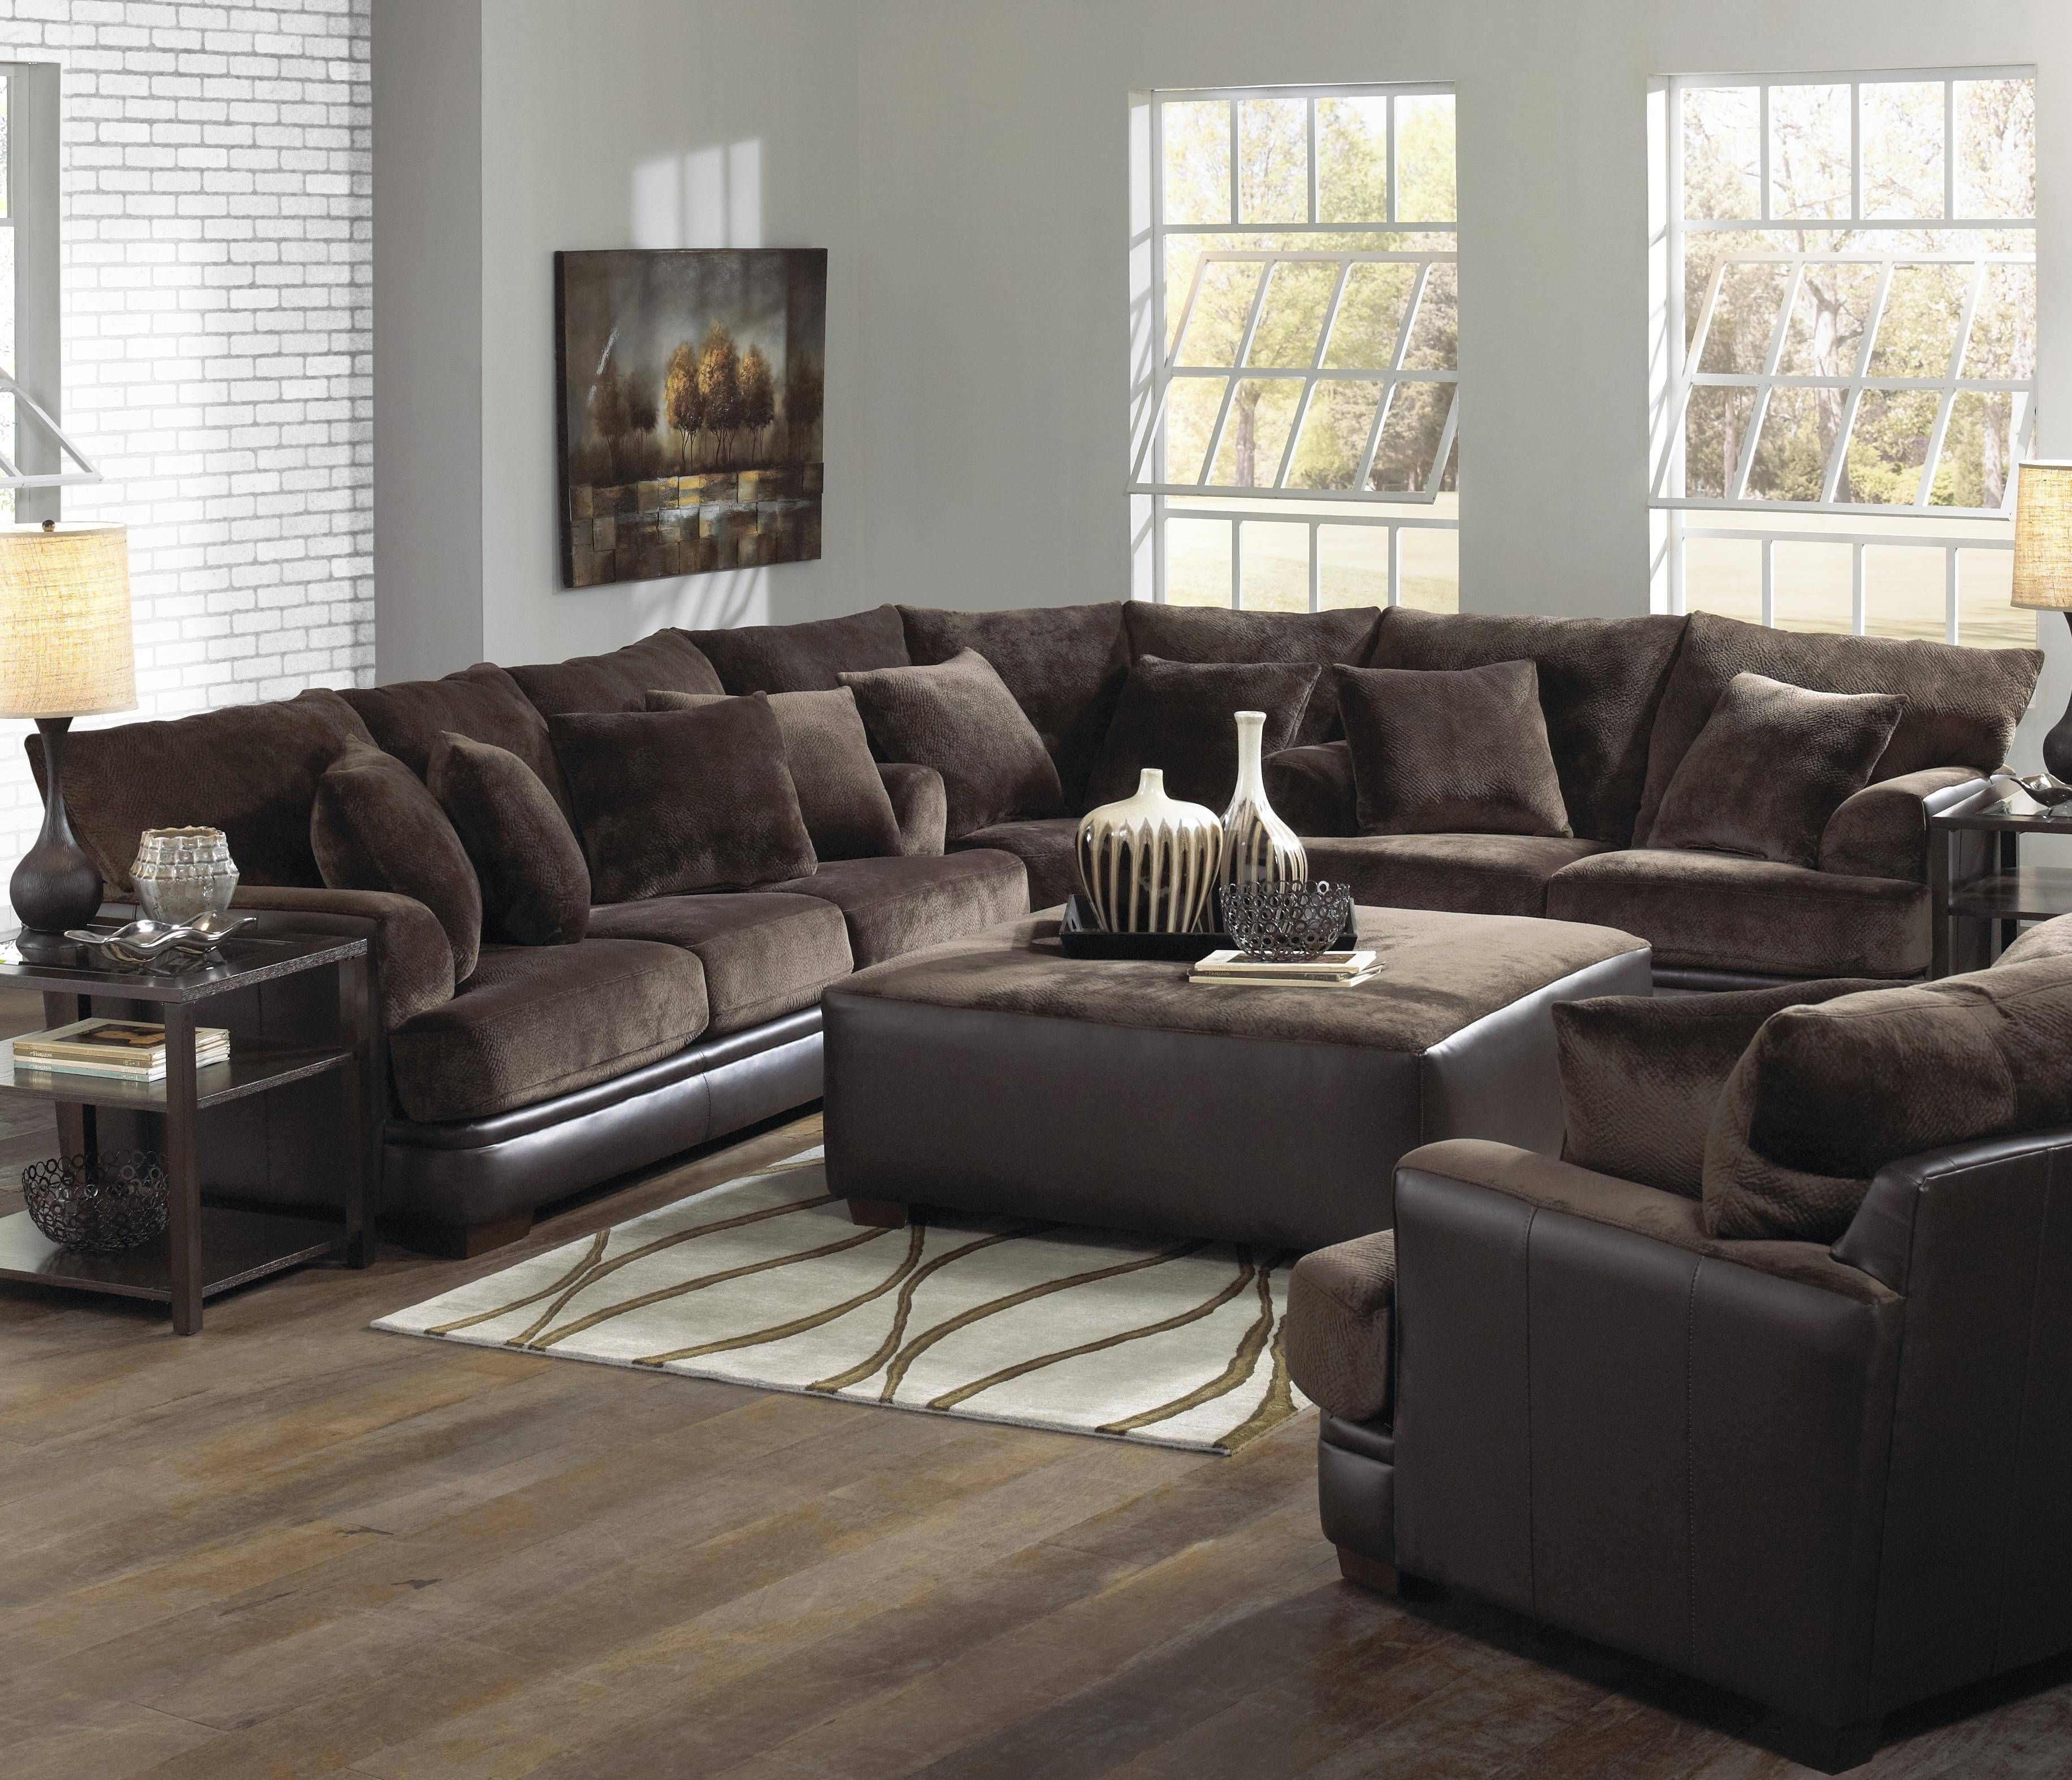 Furniture: Extra Large Sectional Sofa | Extra Large Sectional With Regard To Big Sofas Sectionals (View 2 of 30)